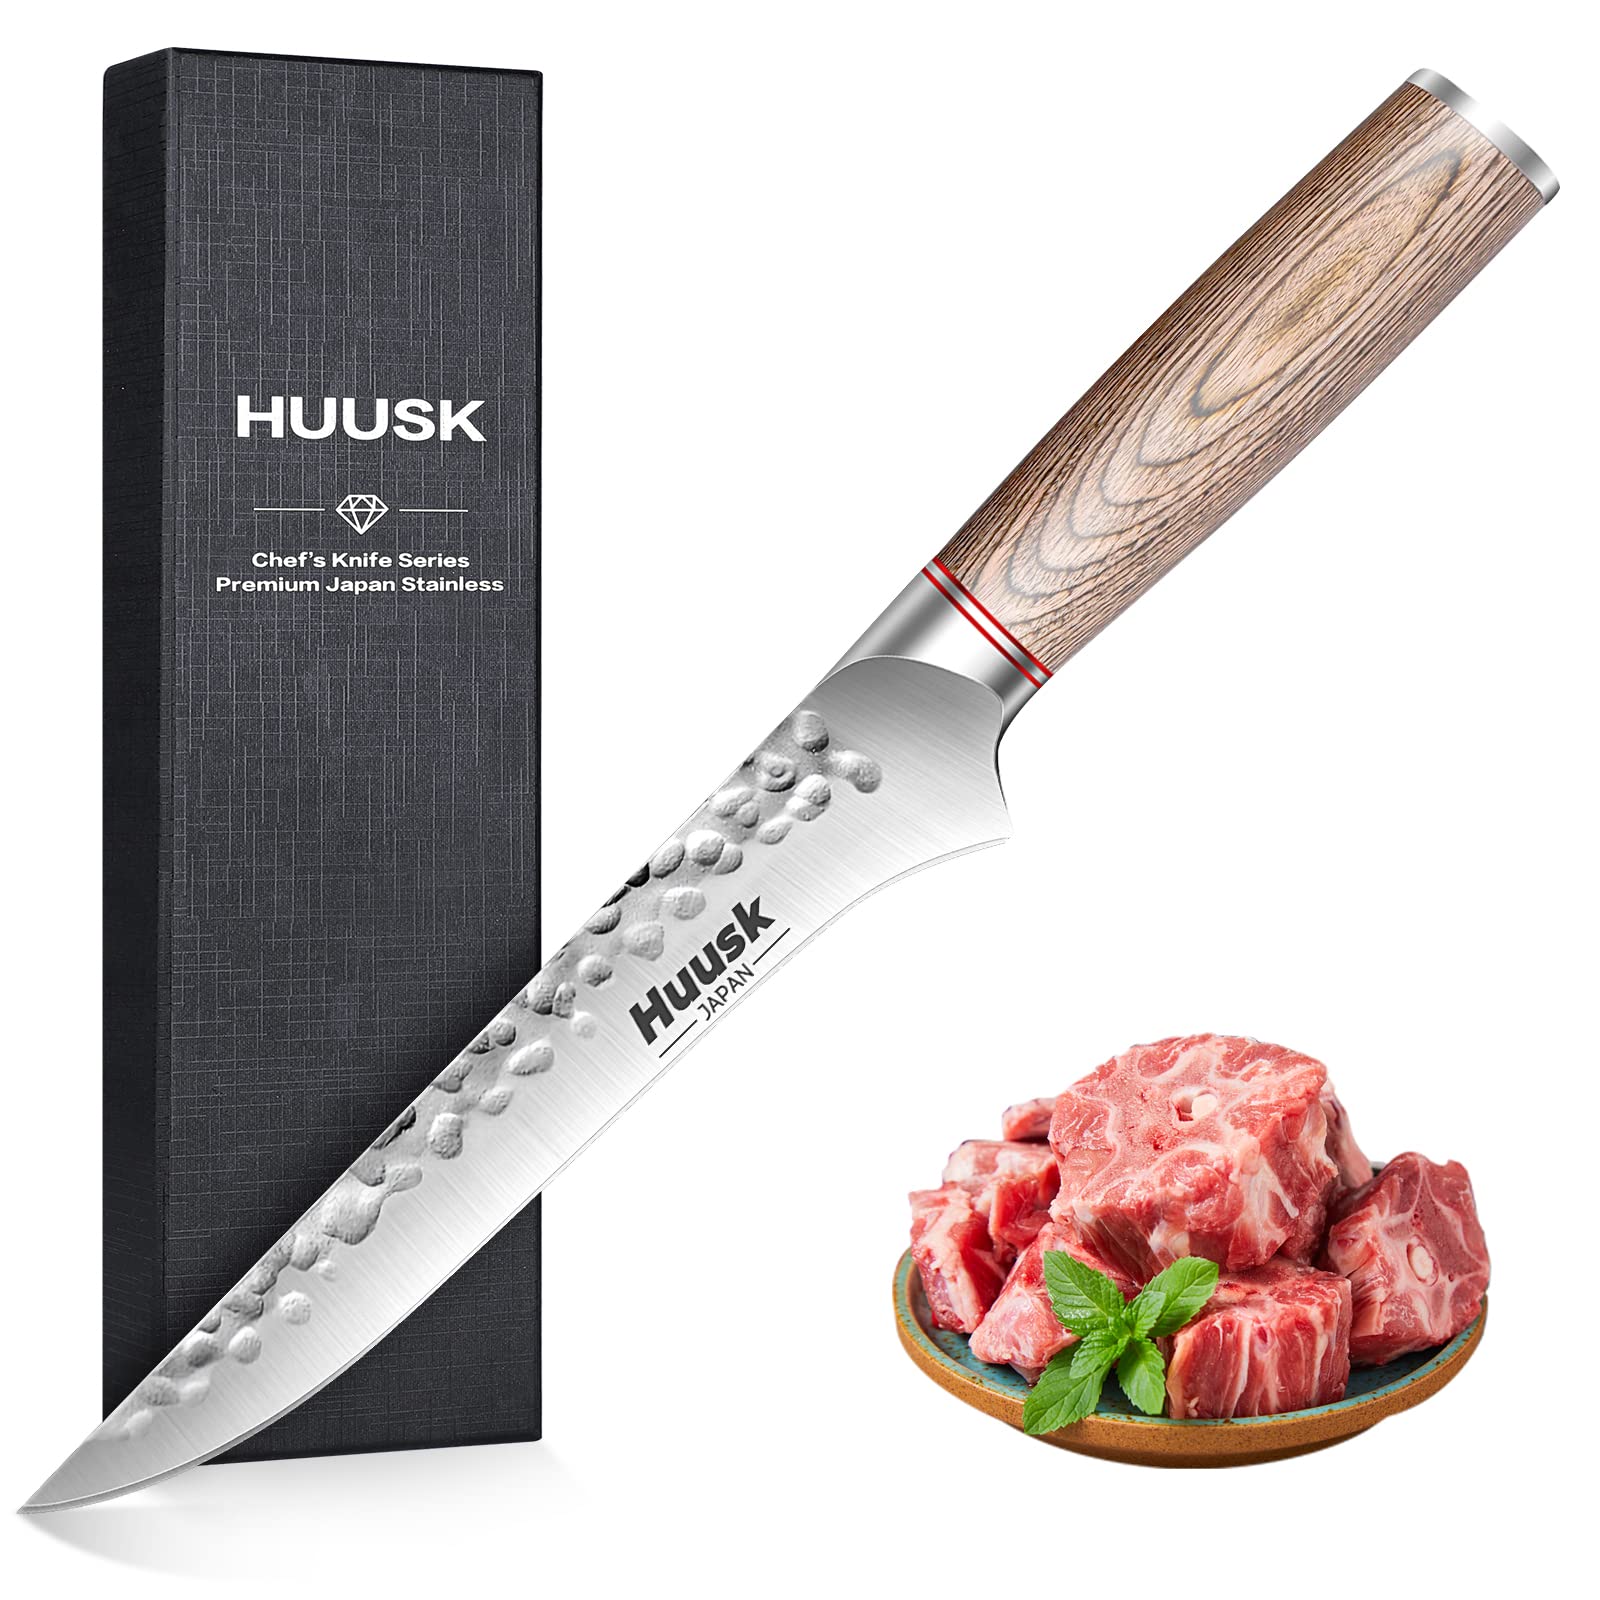 Huusk Japan Knife Professional Kitchen Knife Boning and Gyutou Knife Set for Meat Bones and Greens Cutting High Carbon Steel Sharp Chef knife with Ergonomic Pakkawood Handle and Gift Box for Family Re